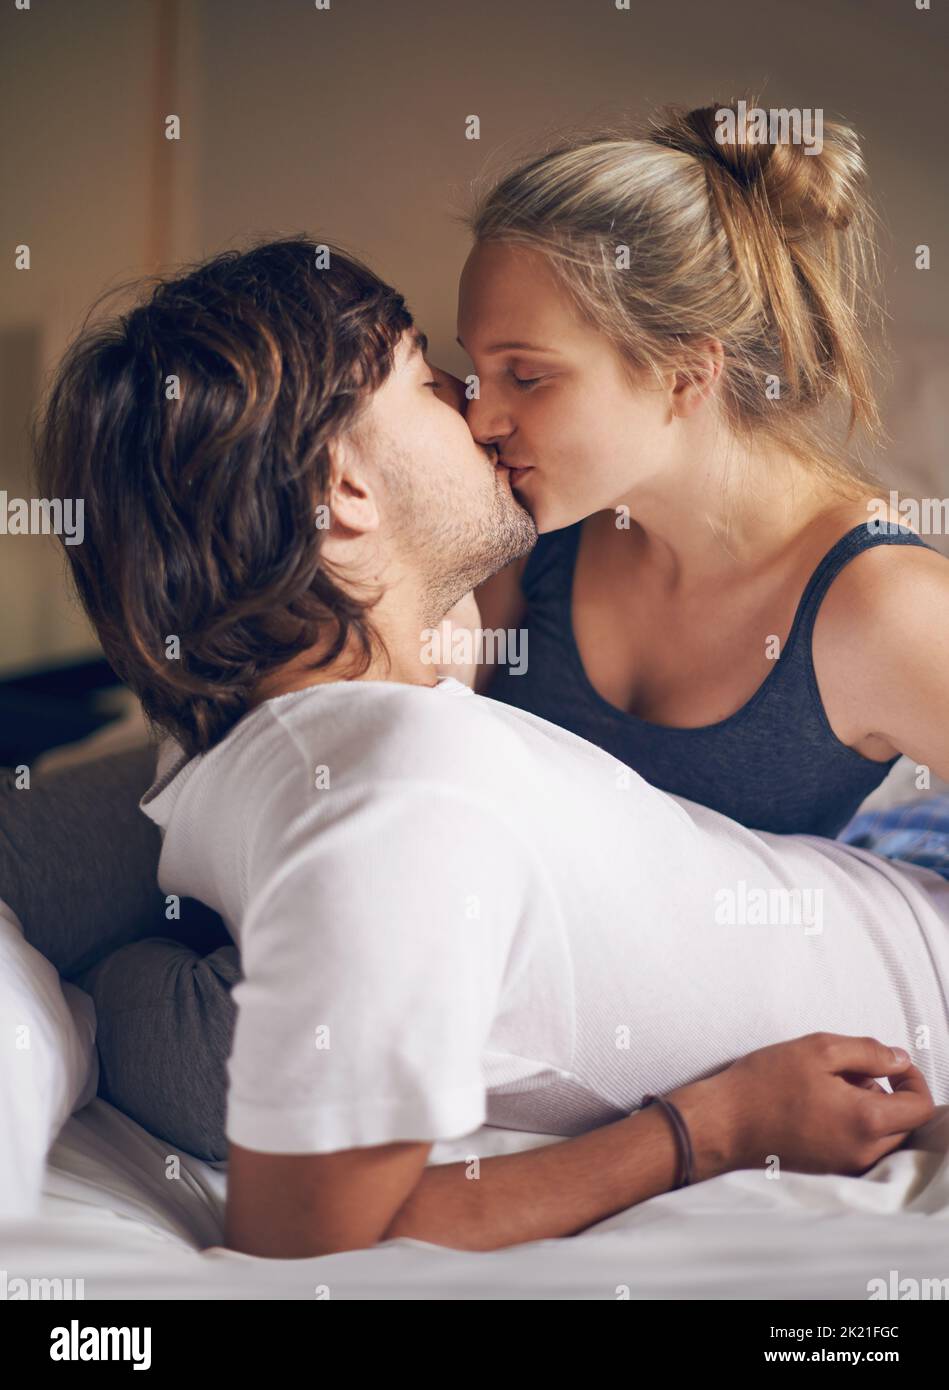 Waking up with a kiss. an affectionate young couple kissing in bed. Stock Photo